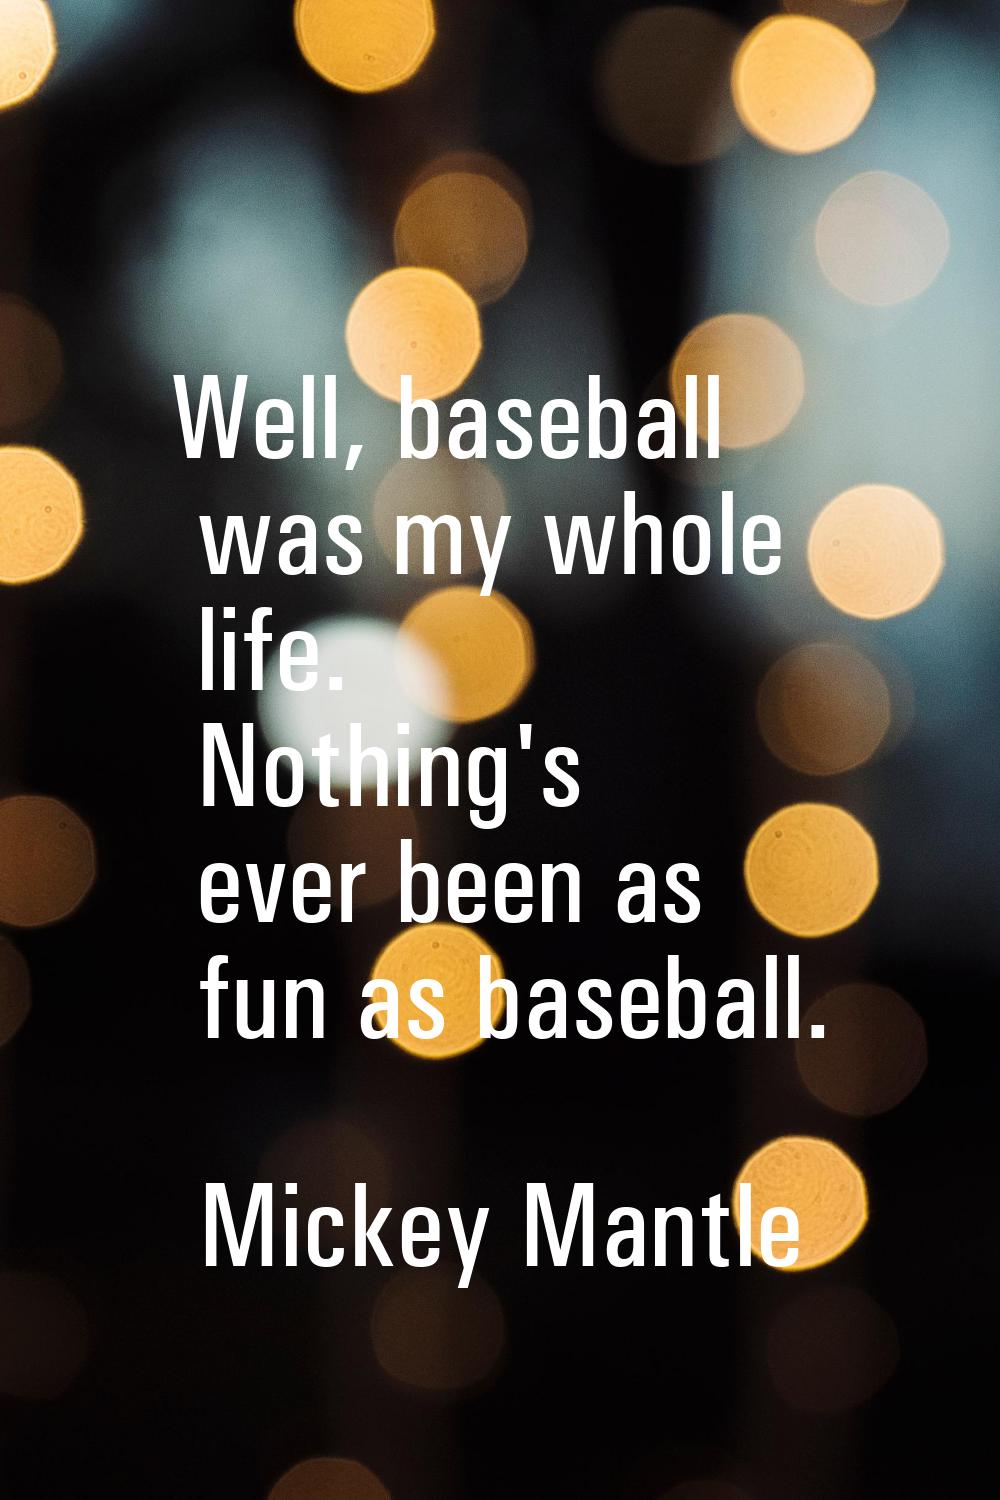 Well, baseball was my whole life. Nothing's ever been as fun as baseball.